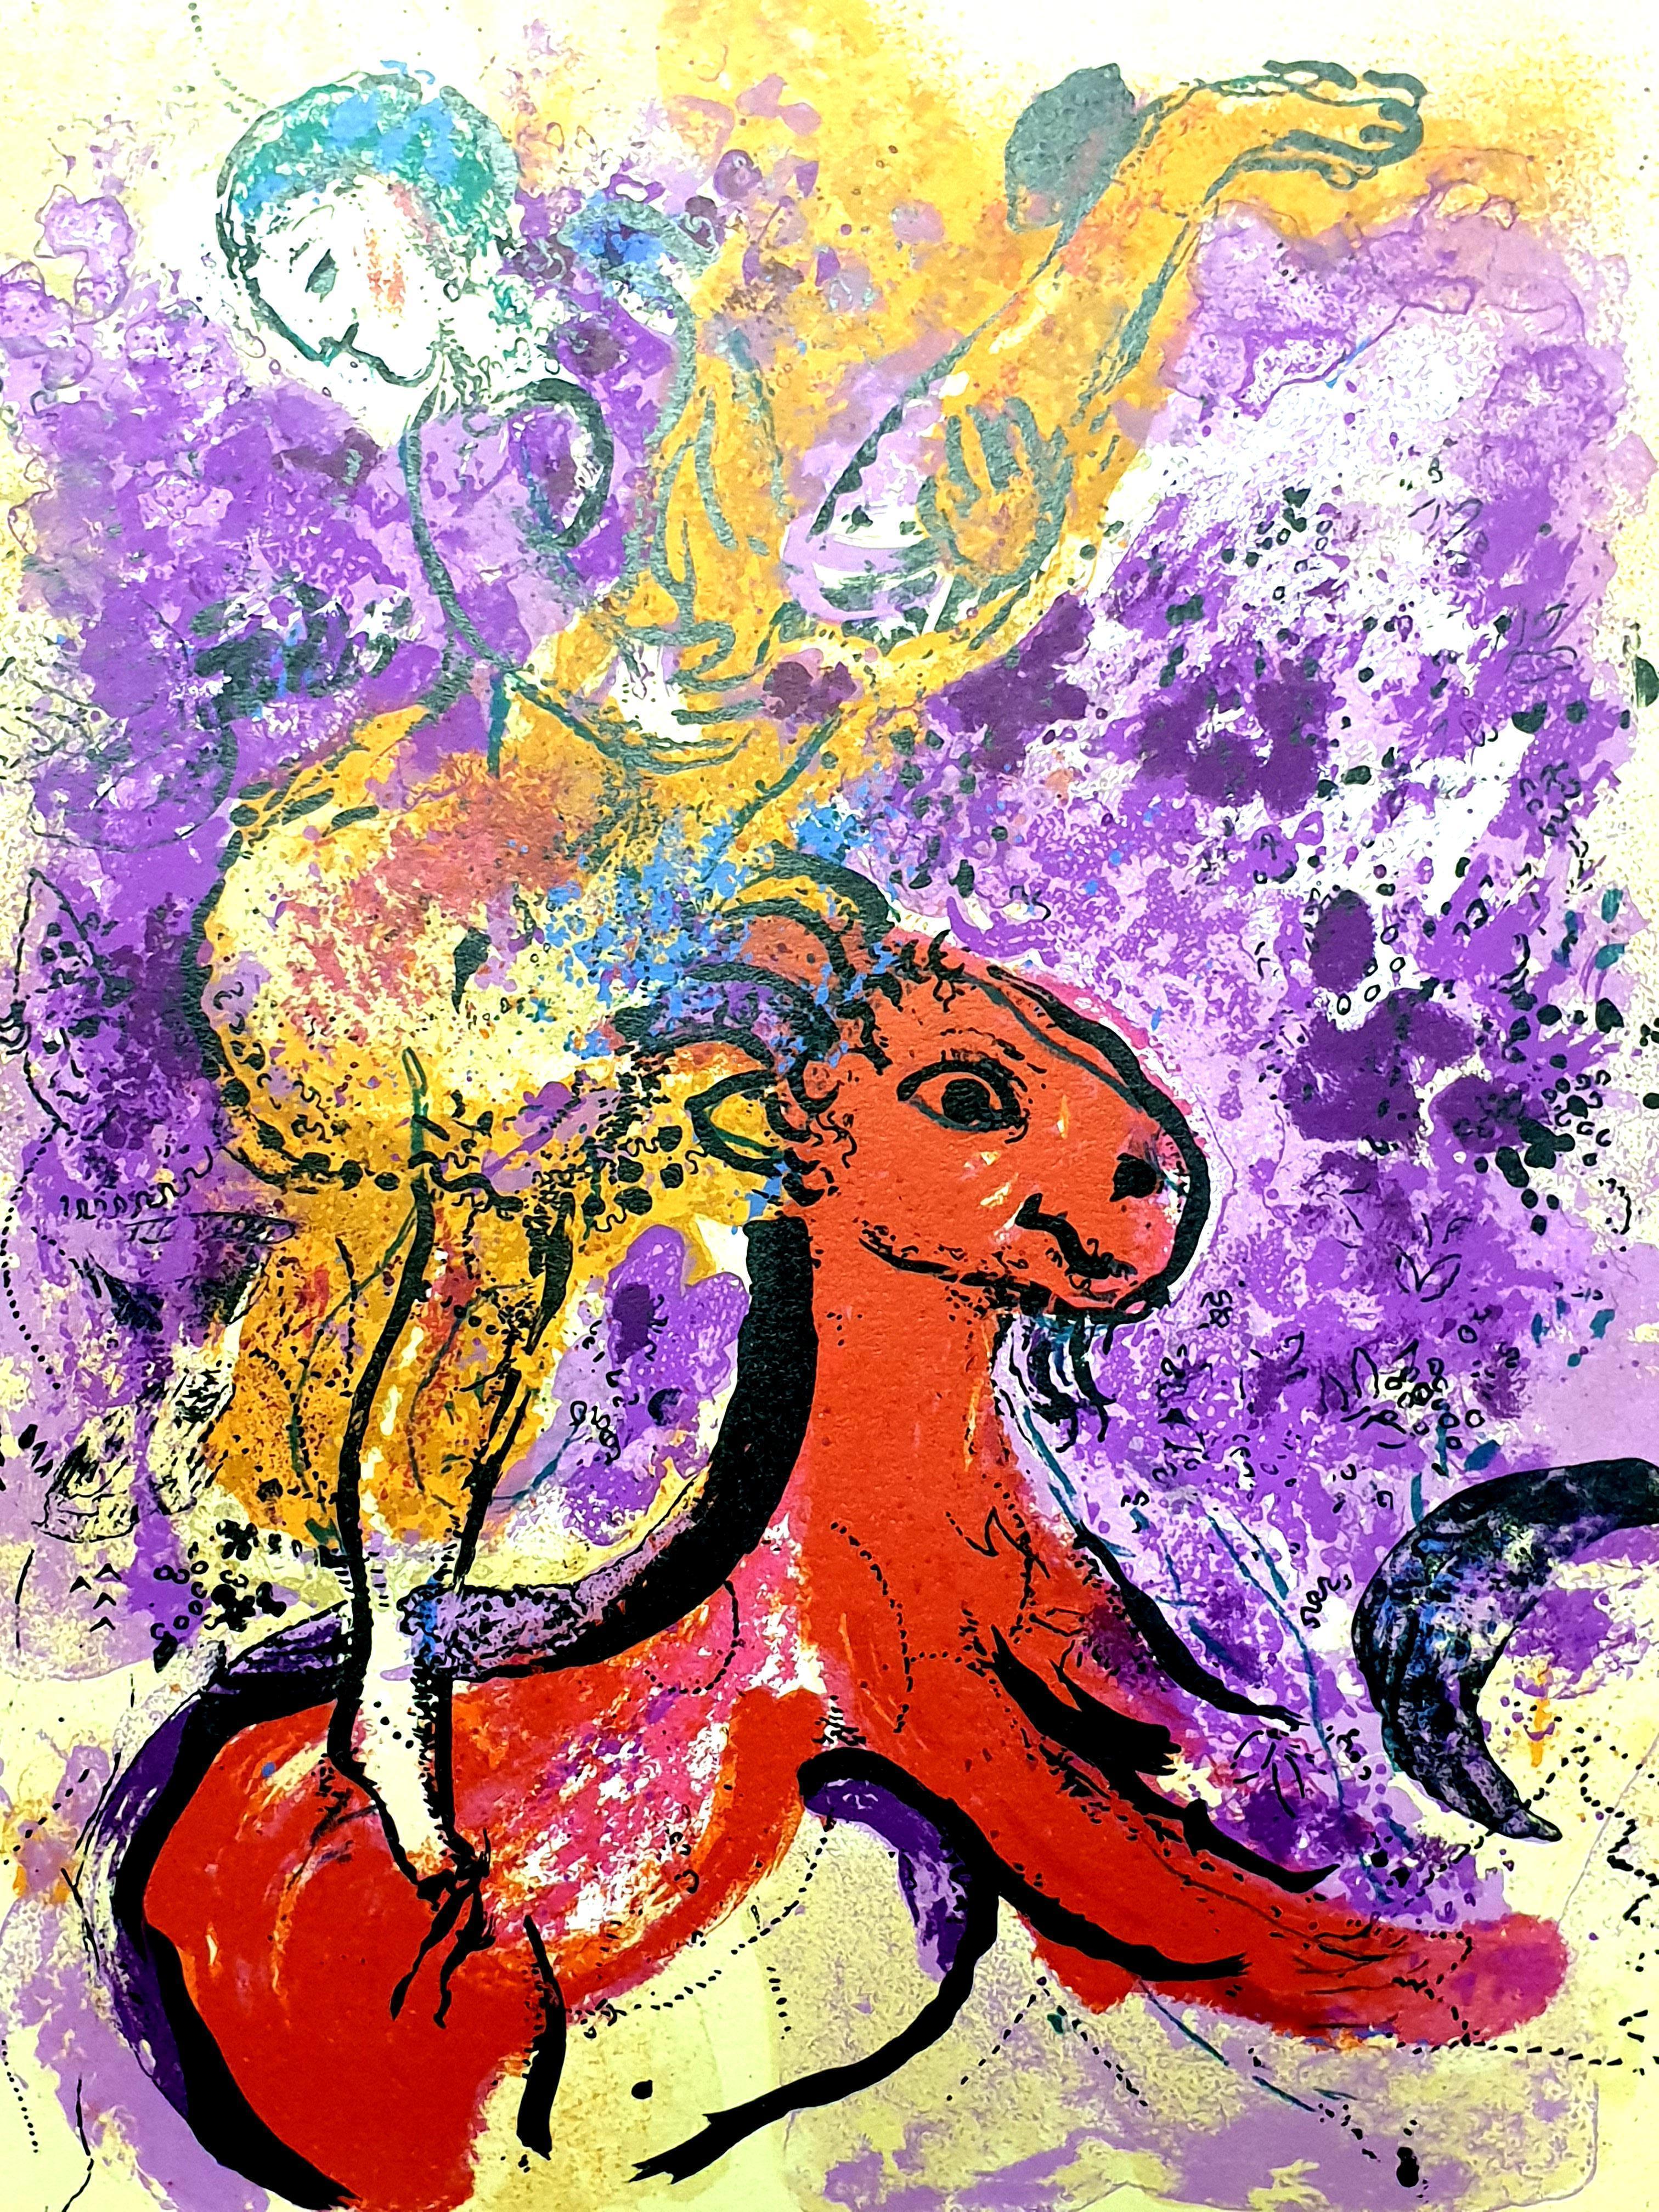 Marc Chagall - The Red Rider - Original Lithograph